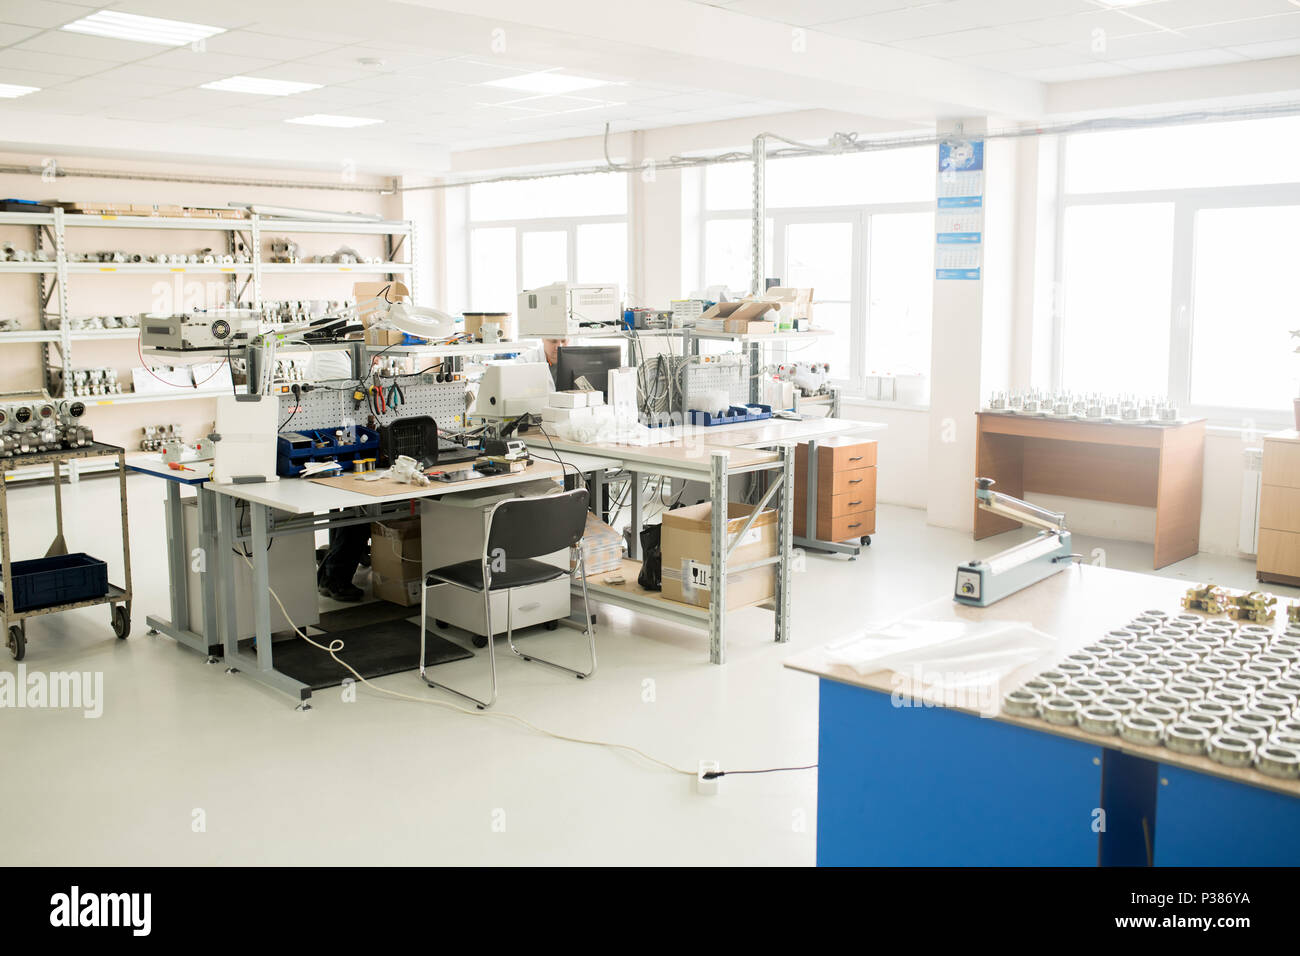 Interior of Measuring Device Factory Stock Photo